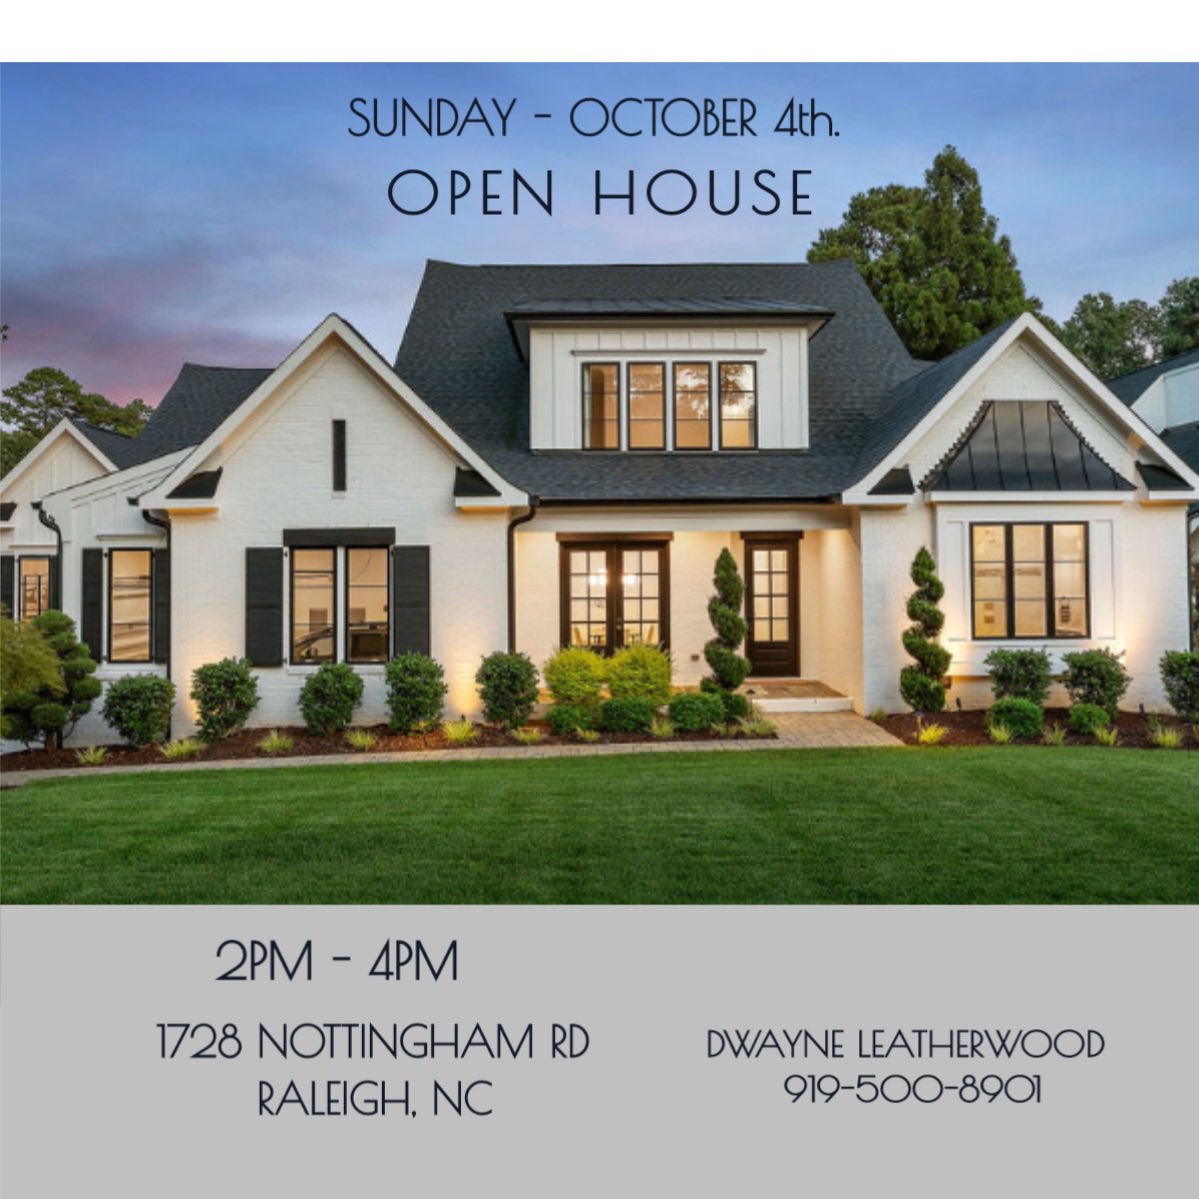 Open House!
Sunday • October 4th
2-4pm
1728 Nottingham Rd.
Raleigh, NC 
7,668 Sq. Ft. • 7 Bedrooms, 7.5 Baths.  $2,150,000
I would love to show you this amazing home located in highly desirable Budleigh. 
919-500-8901 
#eradistinctiveproperties #dwayneleatherwoodrealestate